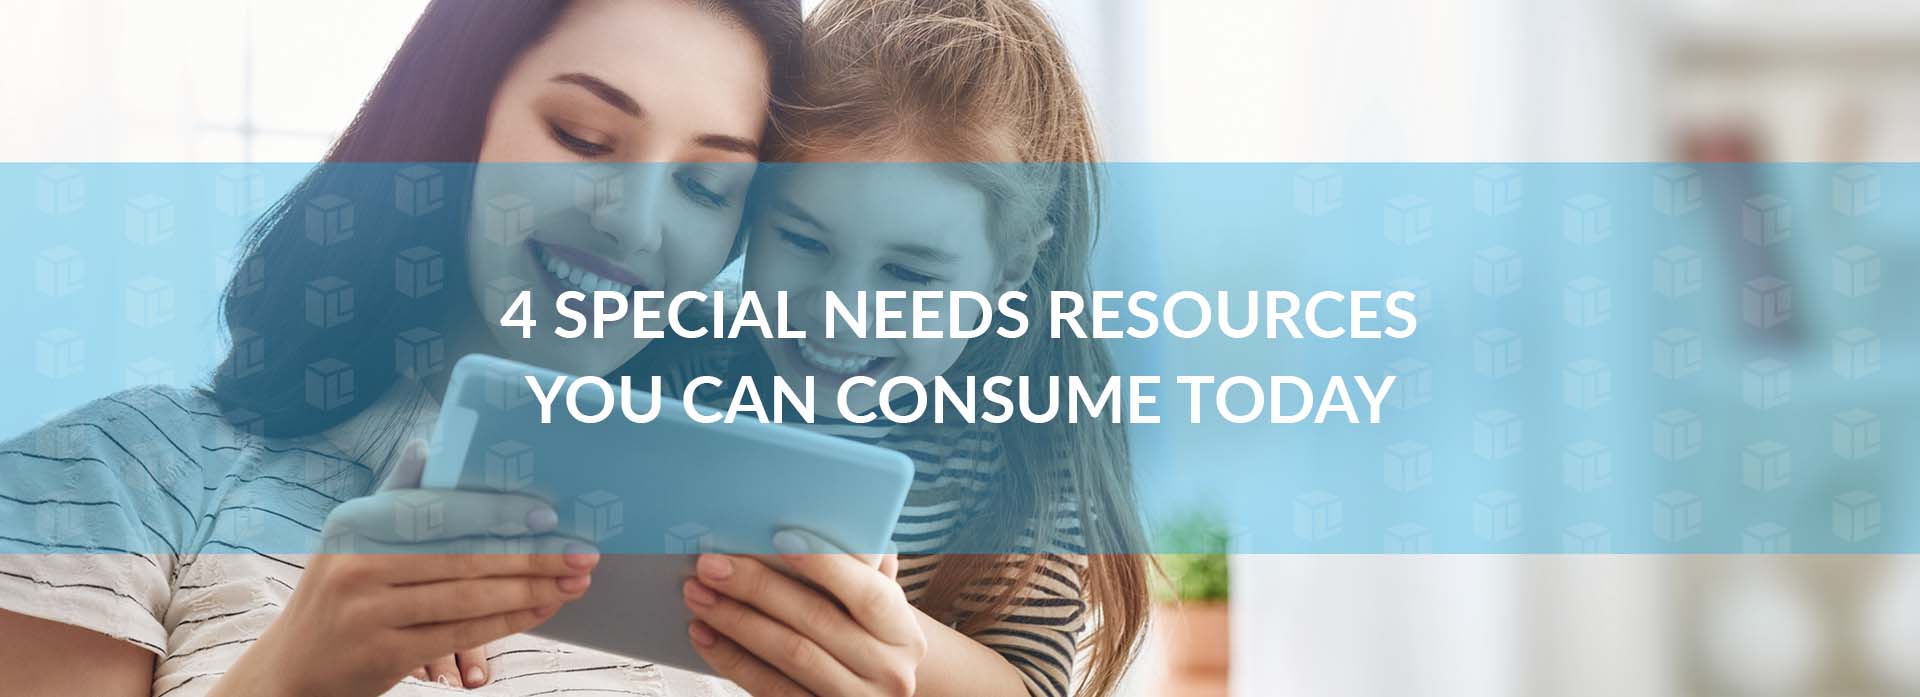 4 Special Needs Resources You Can Consume Today